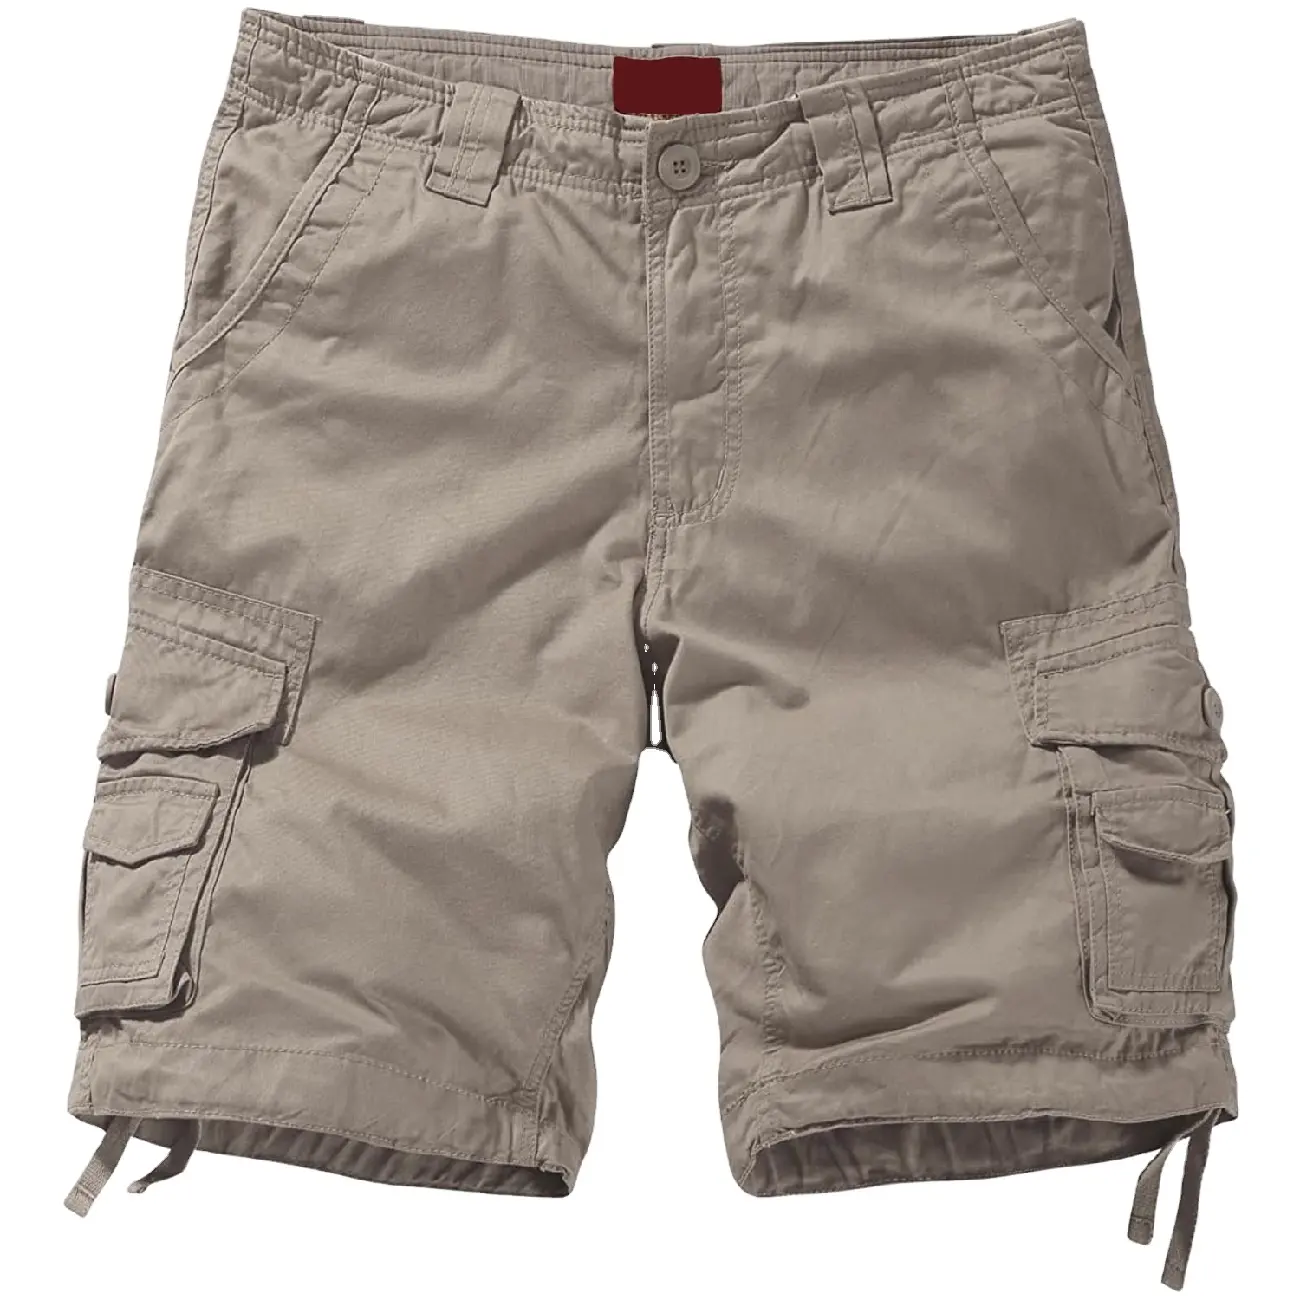 Best Price Breathable Midweight Men's Cargo Shorts Casual Trekking Hip Hop Short Pants From Bangladesh